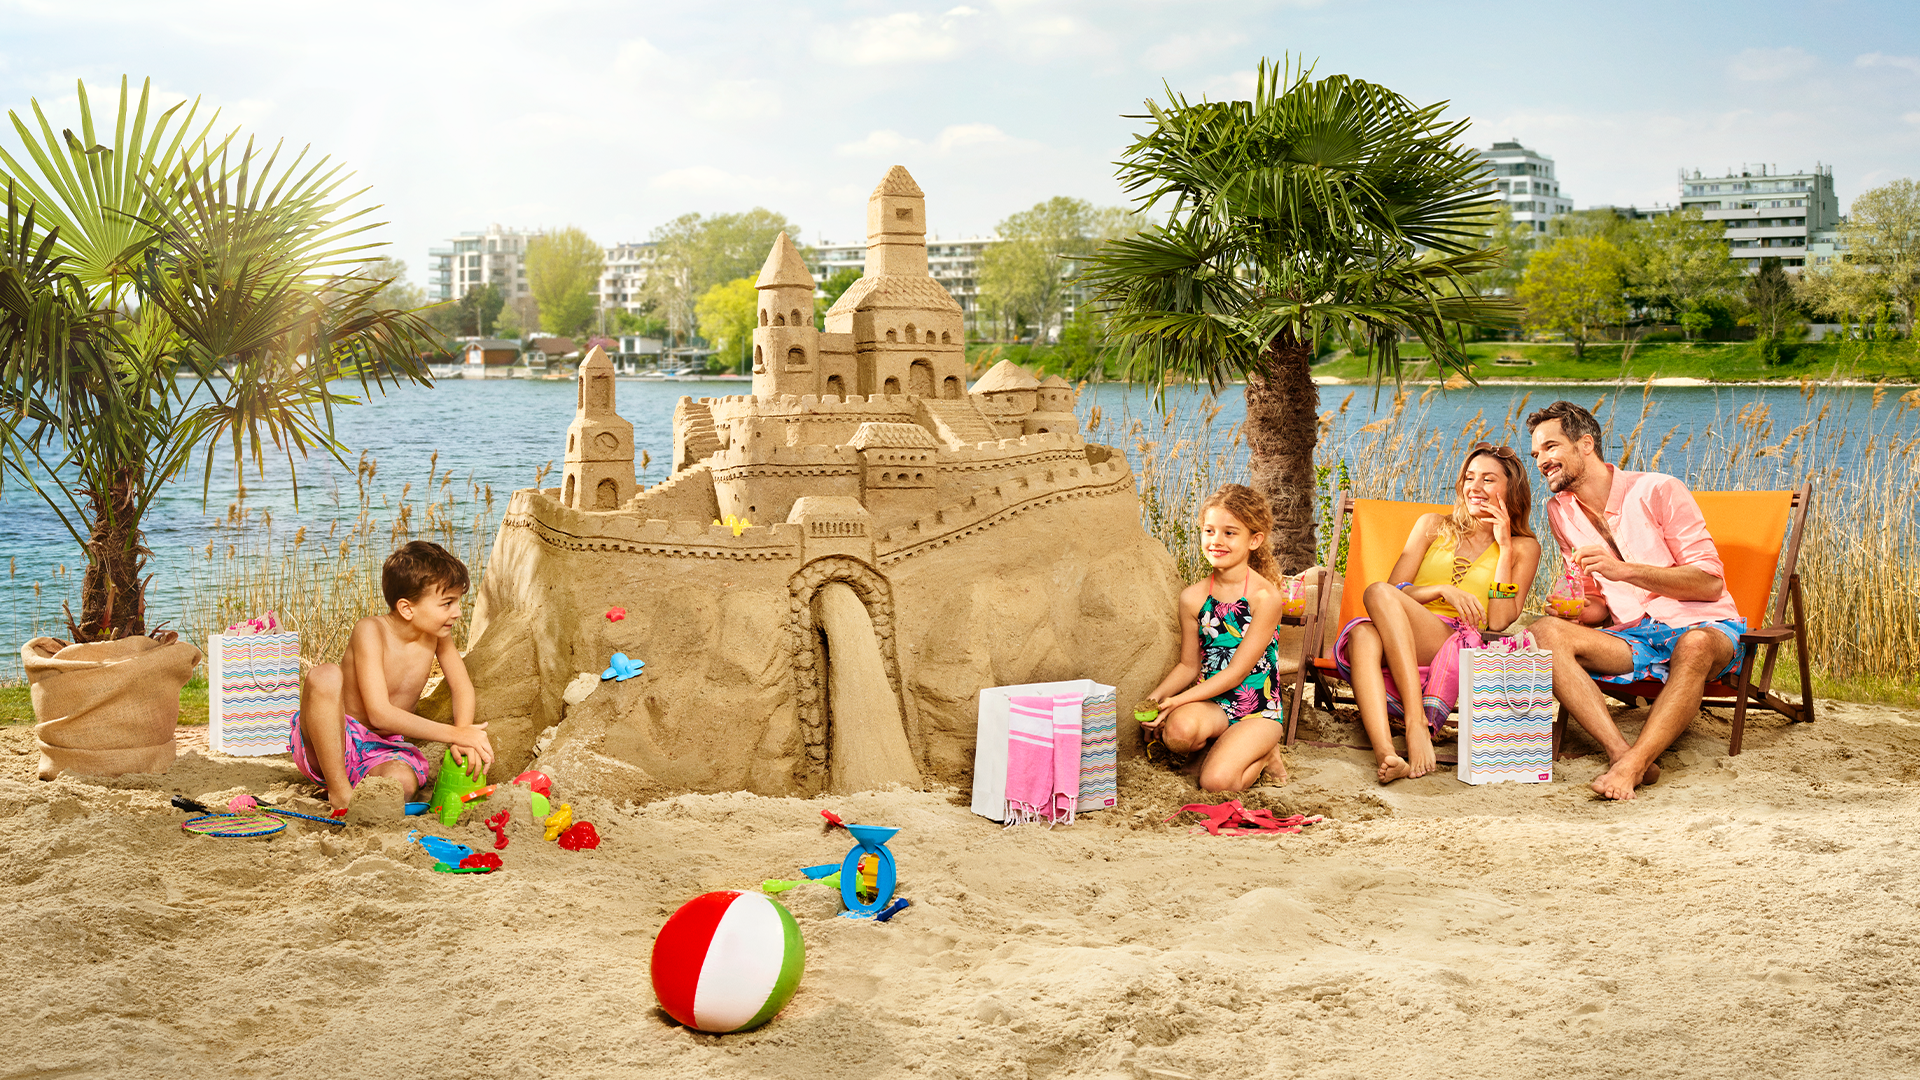 VIVO_SUMMER_WEBSITE_COVER_1920x1080px.png